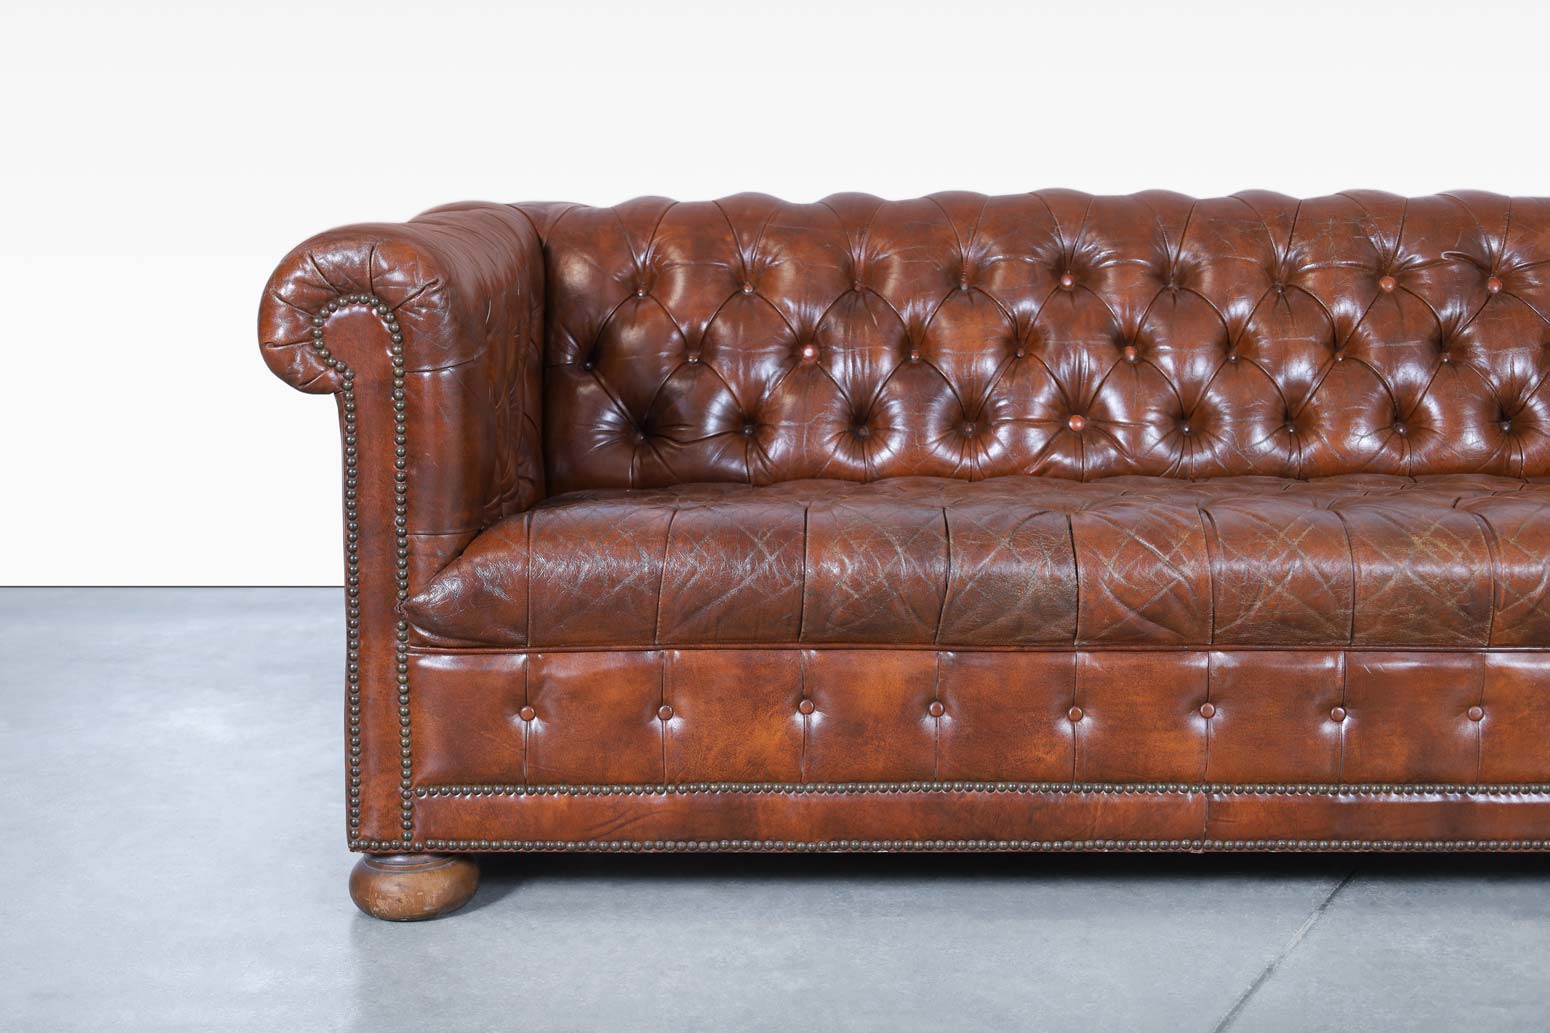 Vintage Brown Leather Chesterfield Sofa